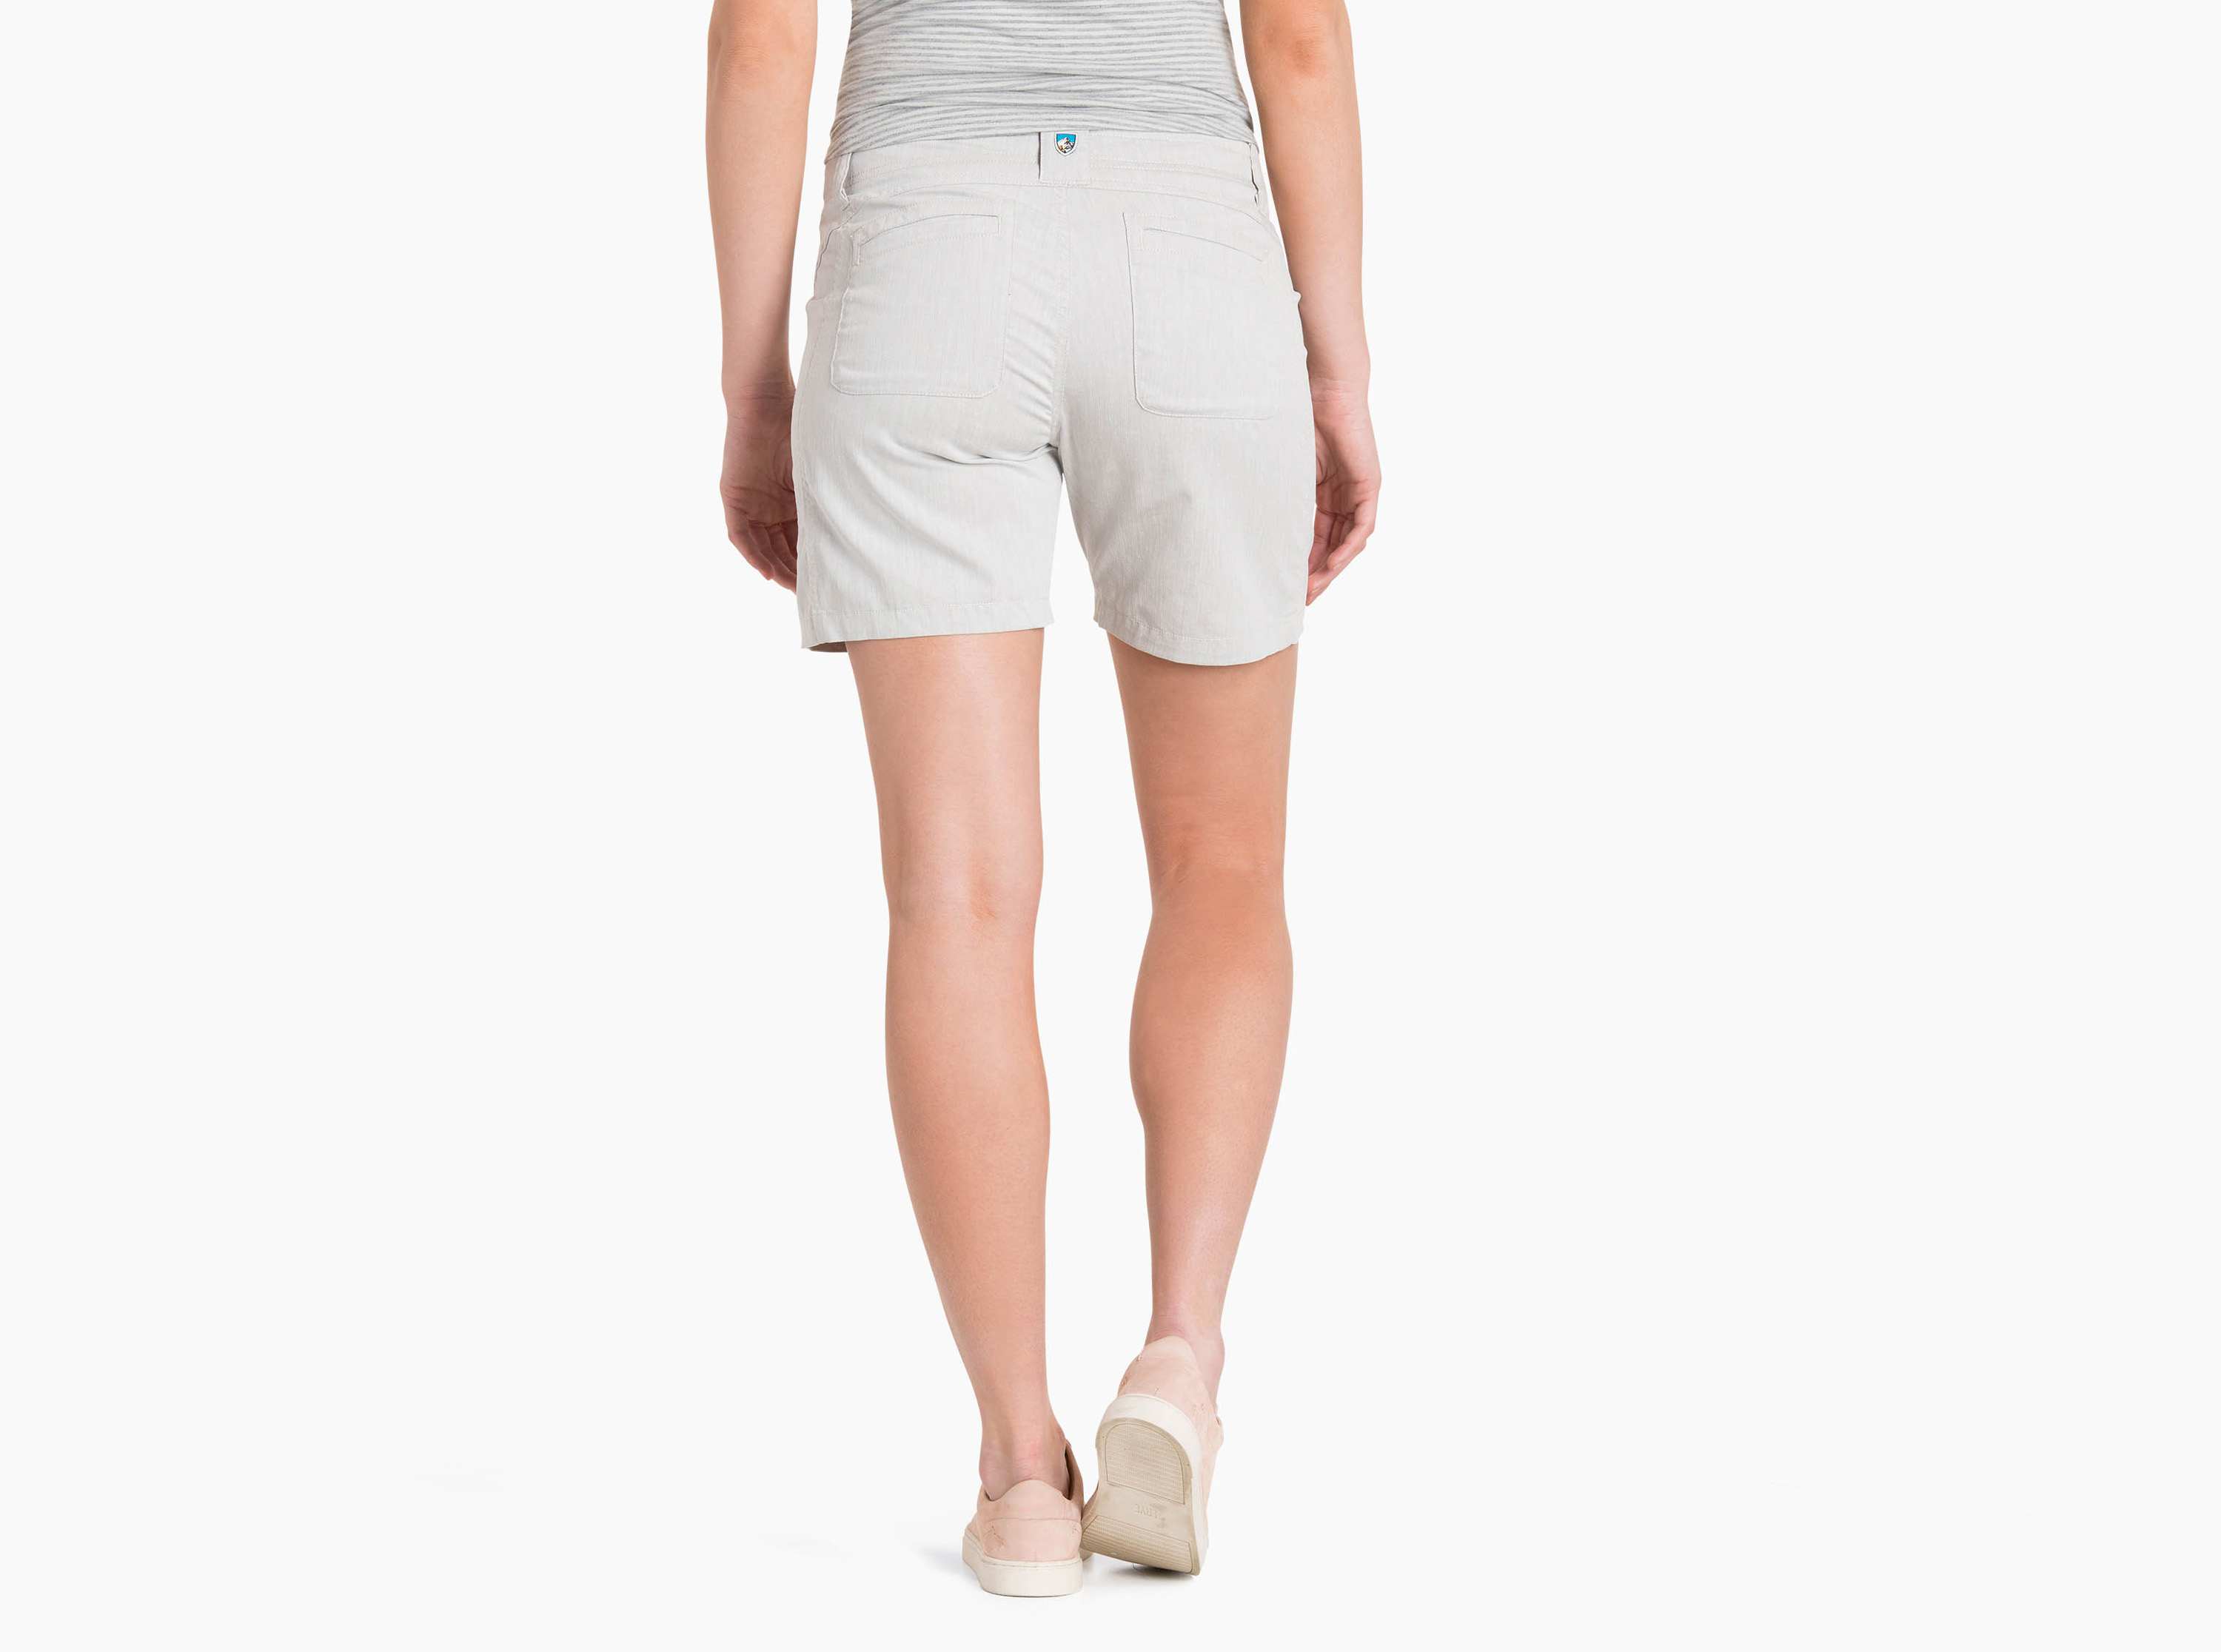 Cabo™ Short in Women's Shorts